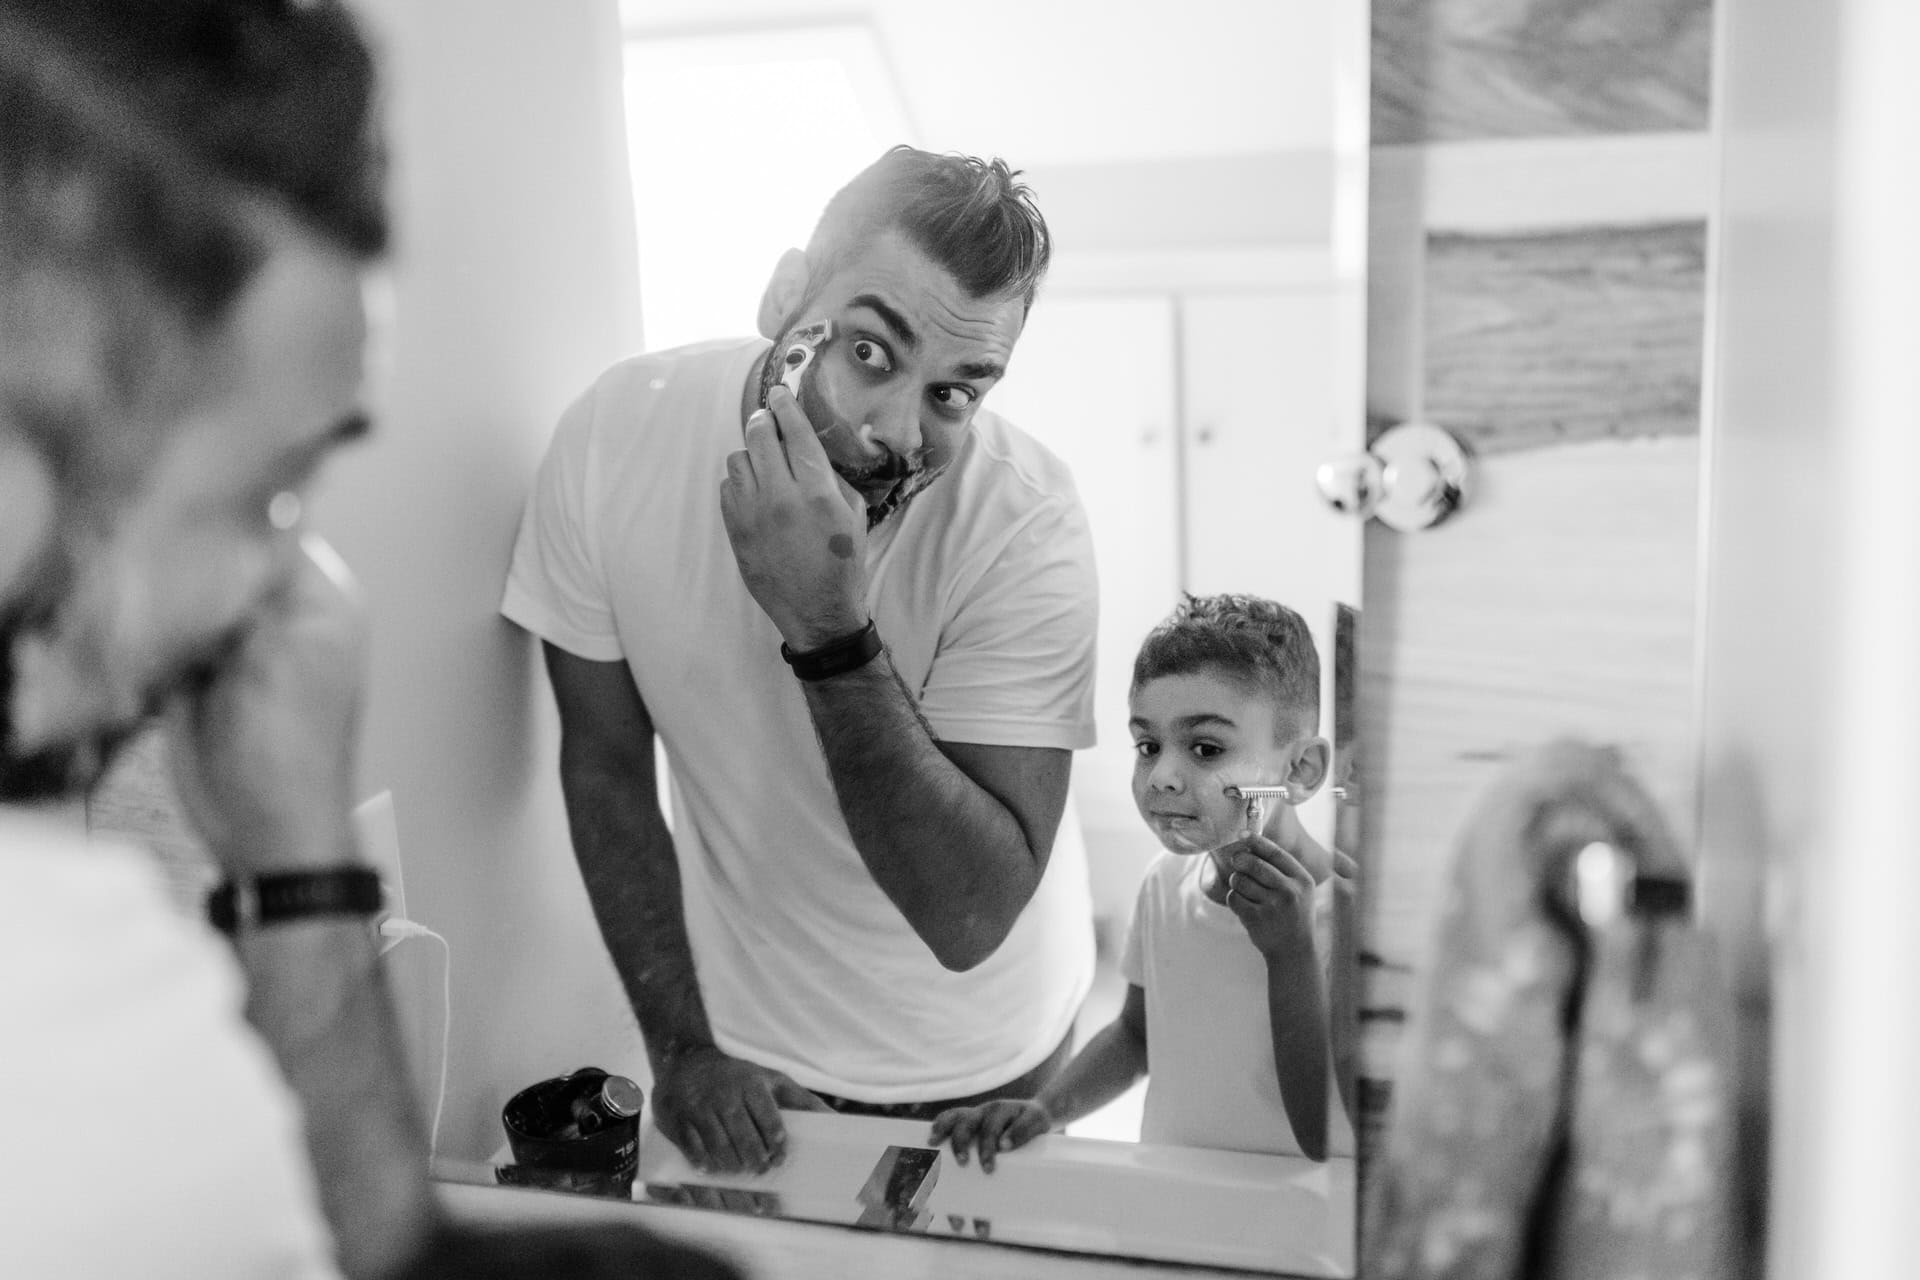 Dad and son shaving in the mirror together in their home